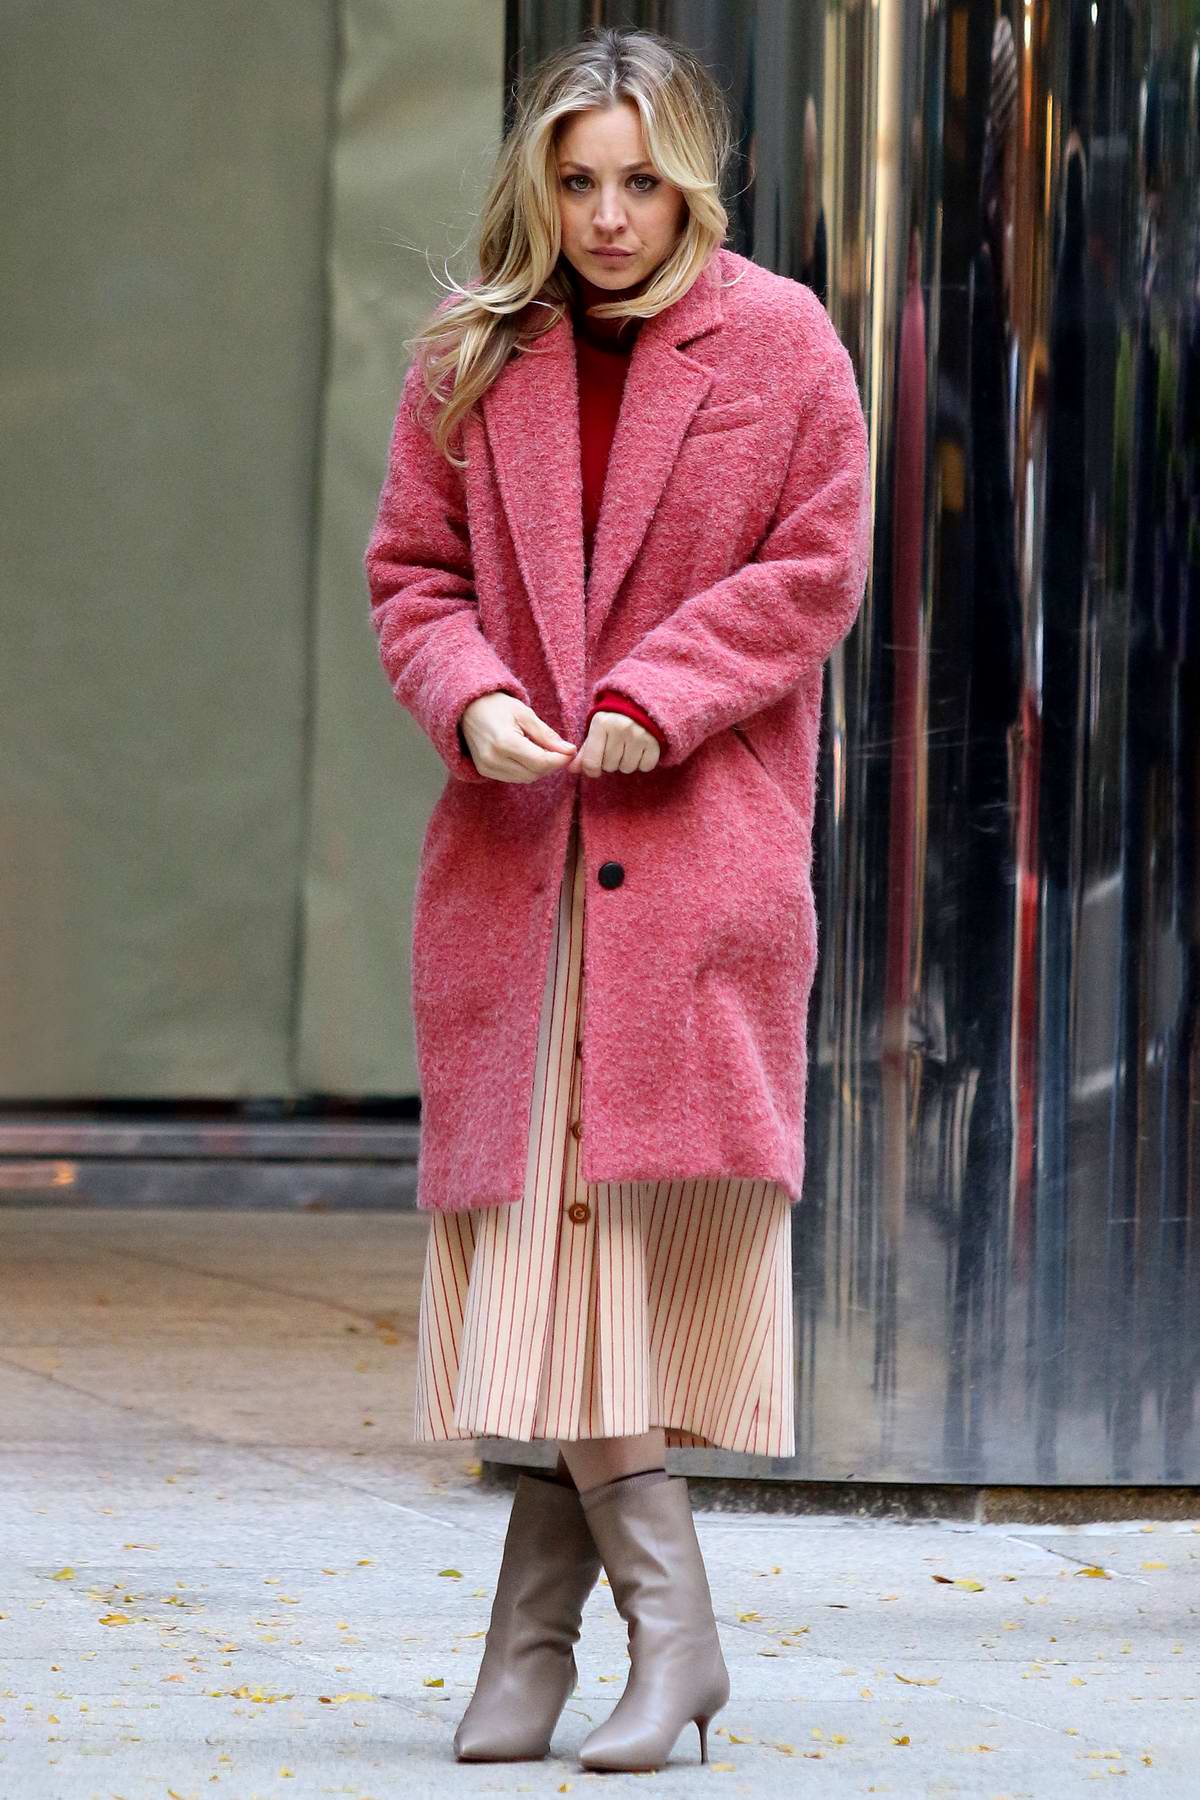 Kaley Cuoco Seen Wearing A Pink Coat On The Set Of The